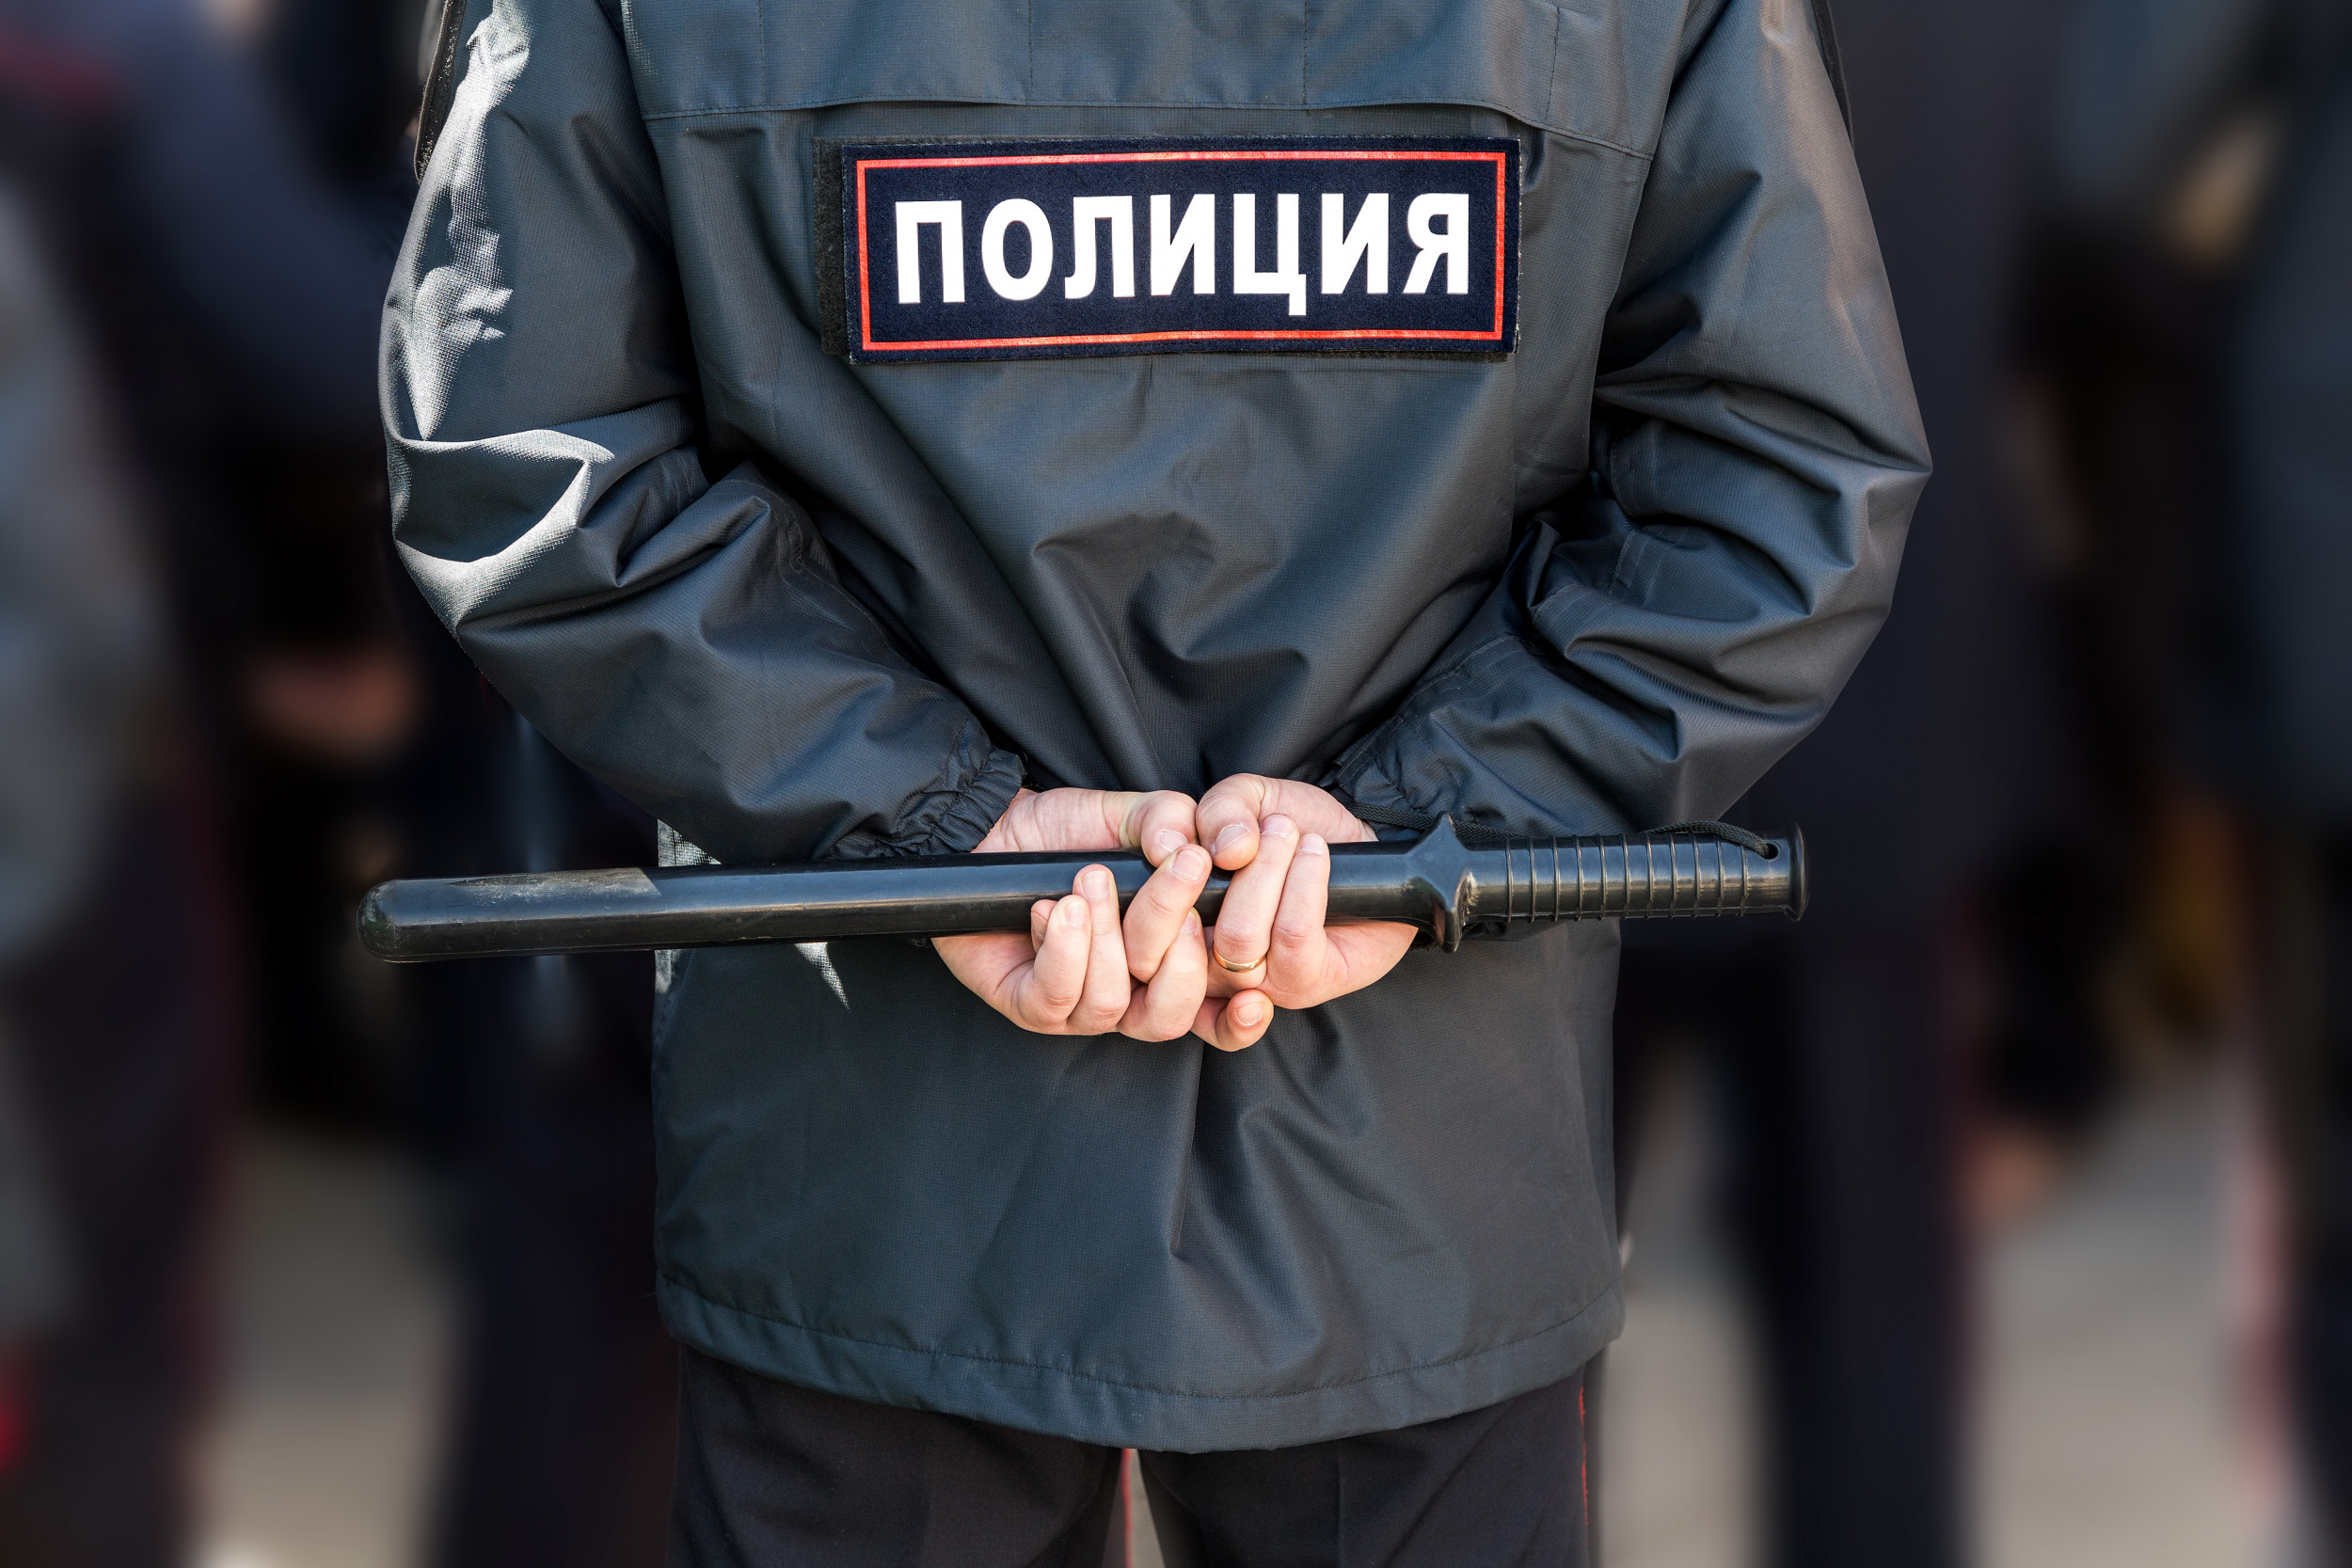 russian police officer